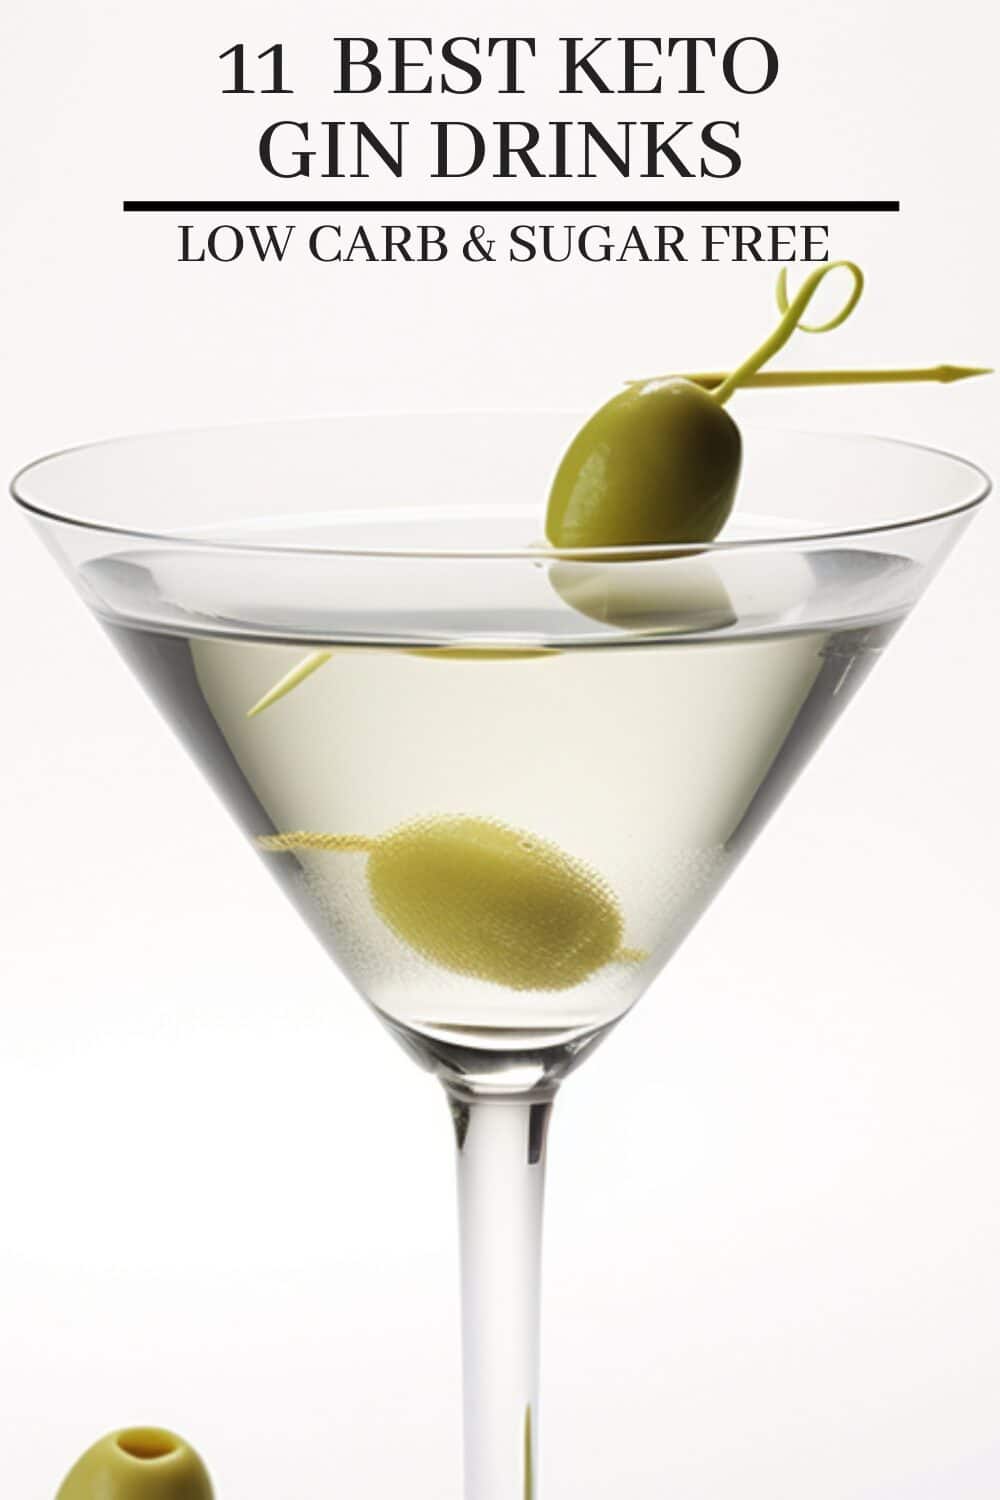 Gin Martini: A crystal-clear drink with a lemon twist or olive garnish, made by stirring gin and dry vermouth together and straining into a chilled glass